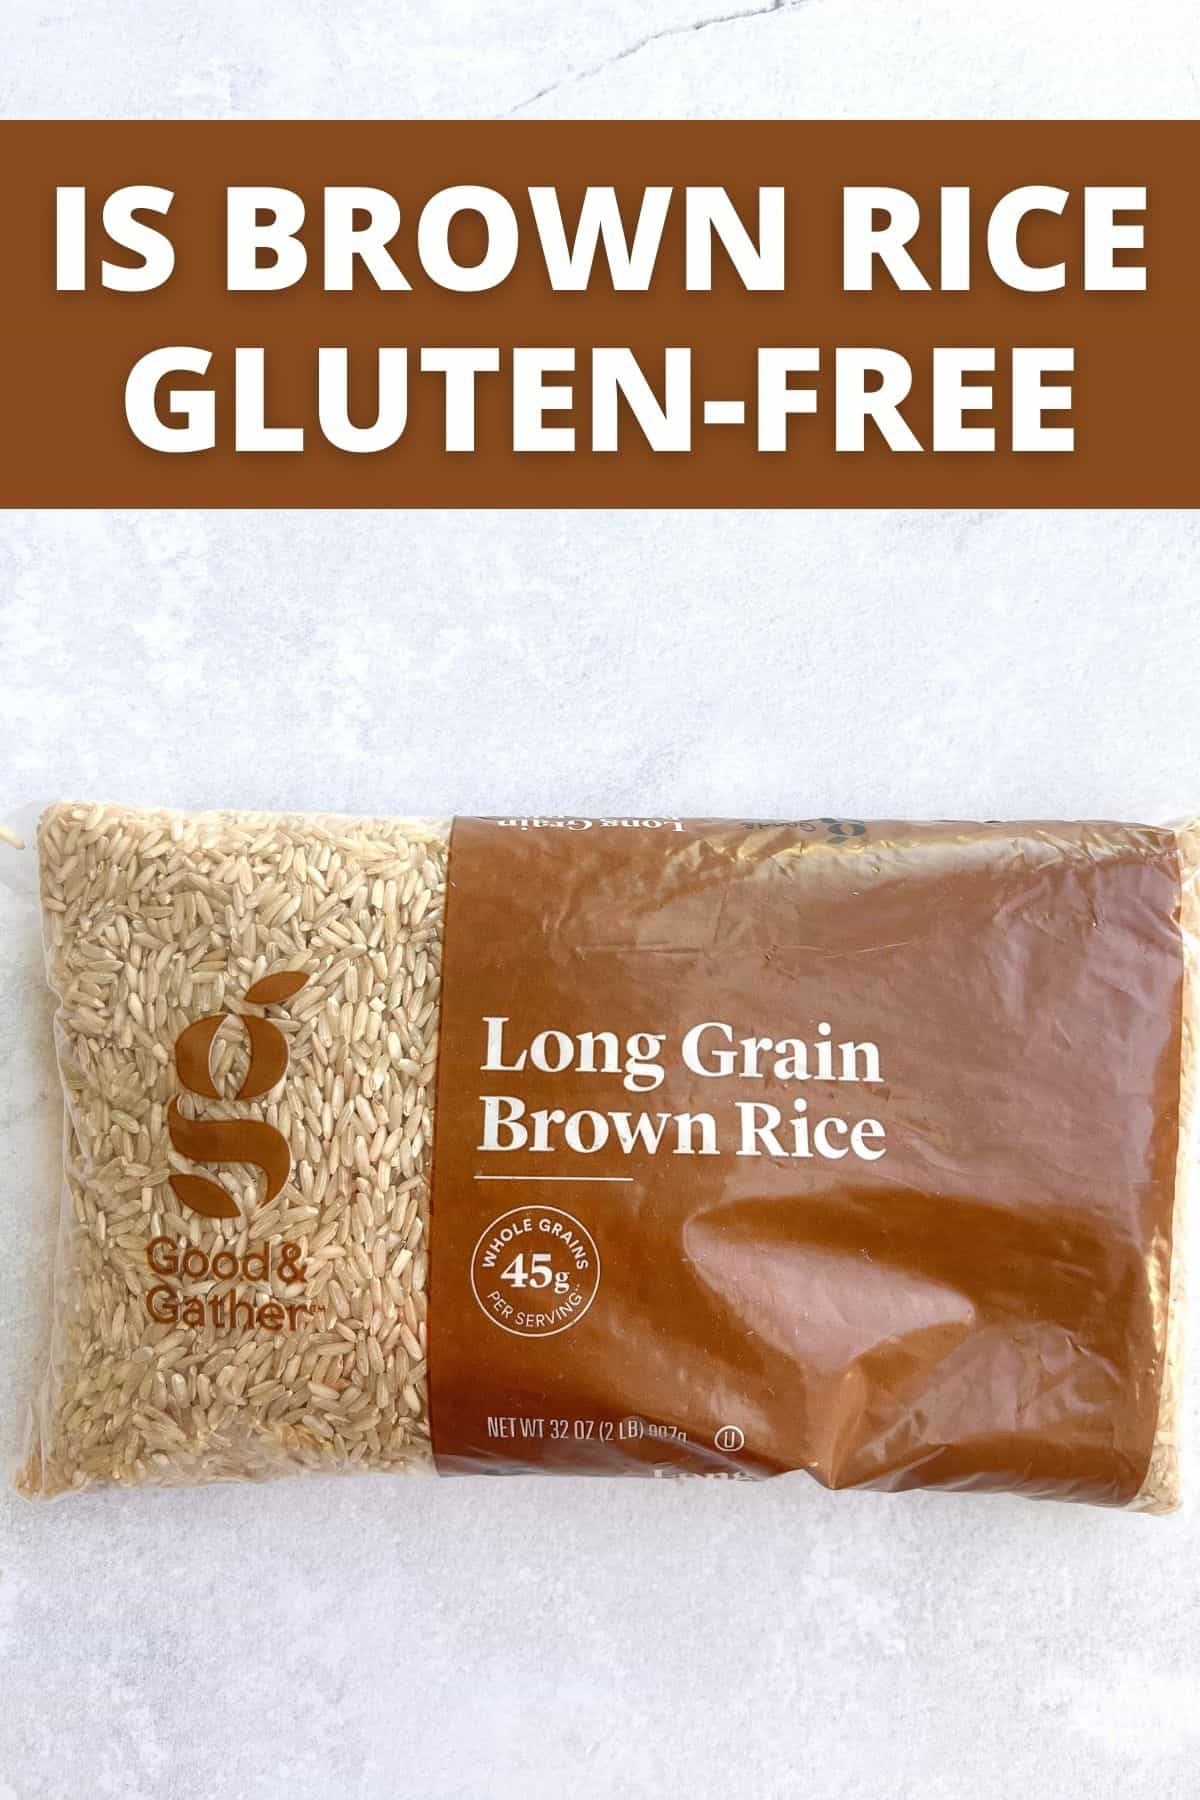 A bag of brown rice, with text that reads: "Is brown rice gluten-free?"